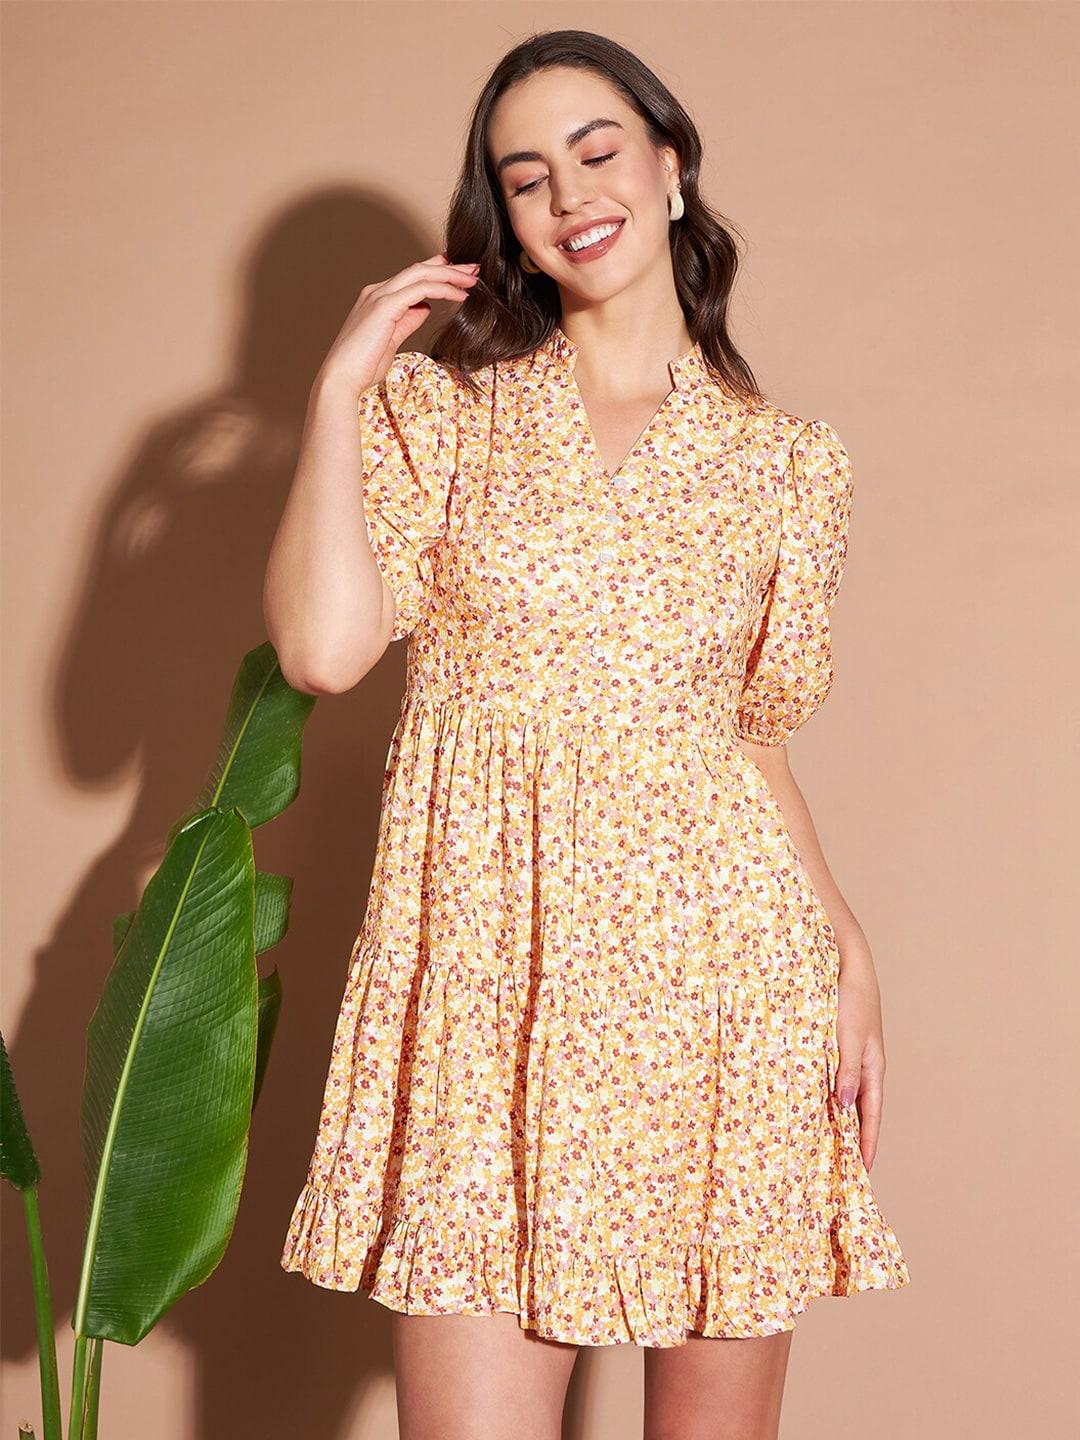 marie-claire-yellow-&-white-floral-printed-puff-sleeves-fit-&-flare-dress